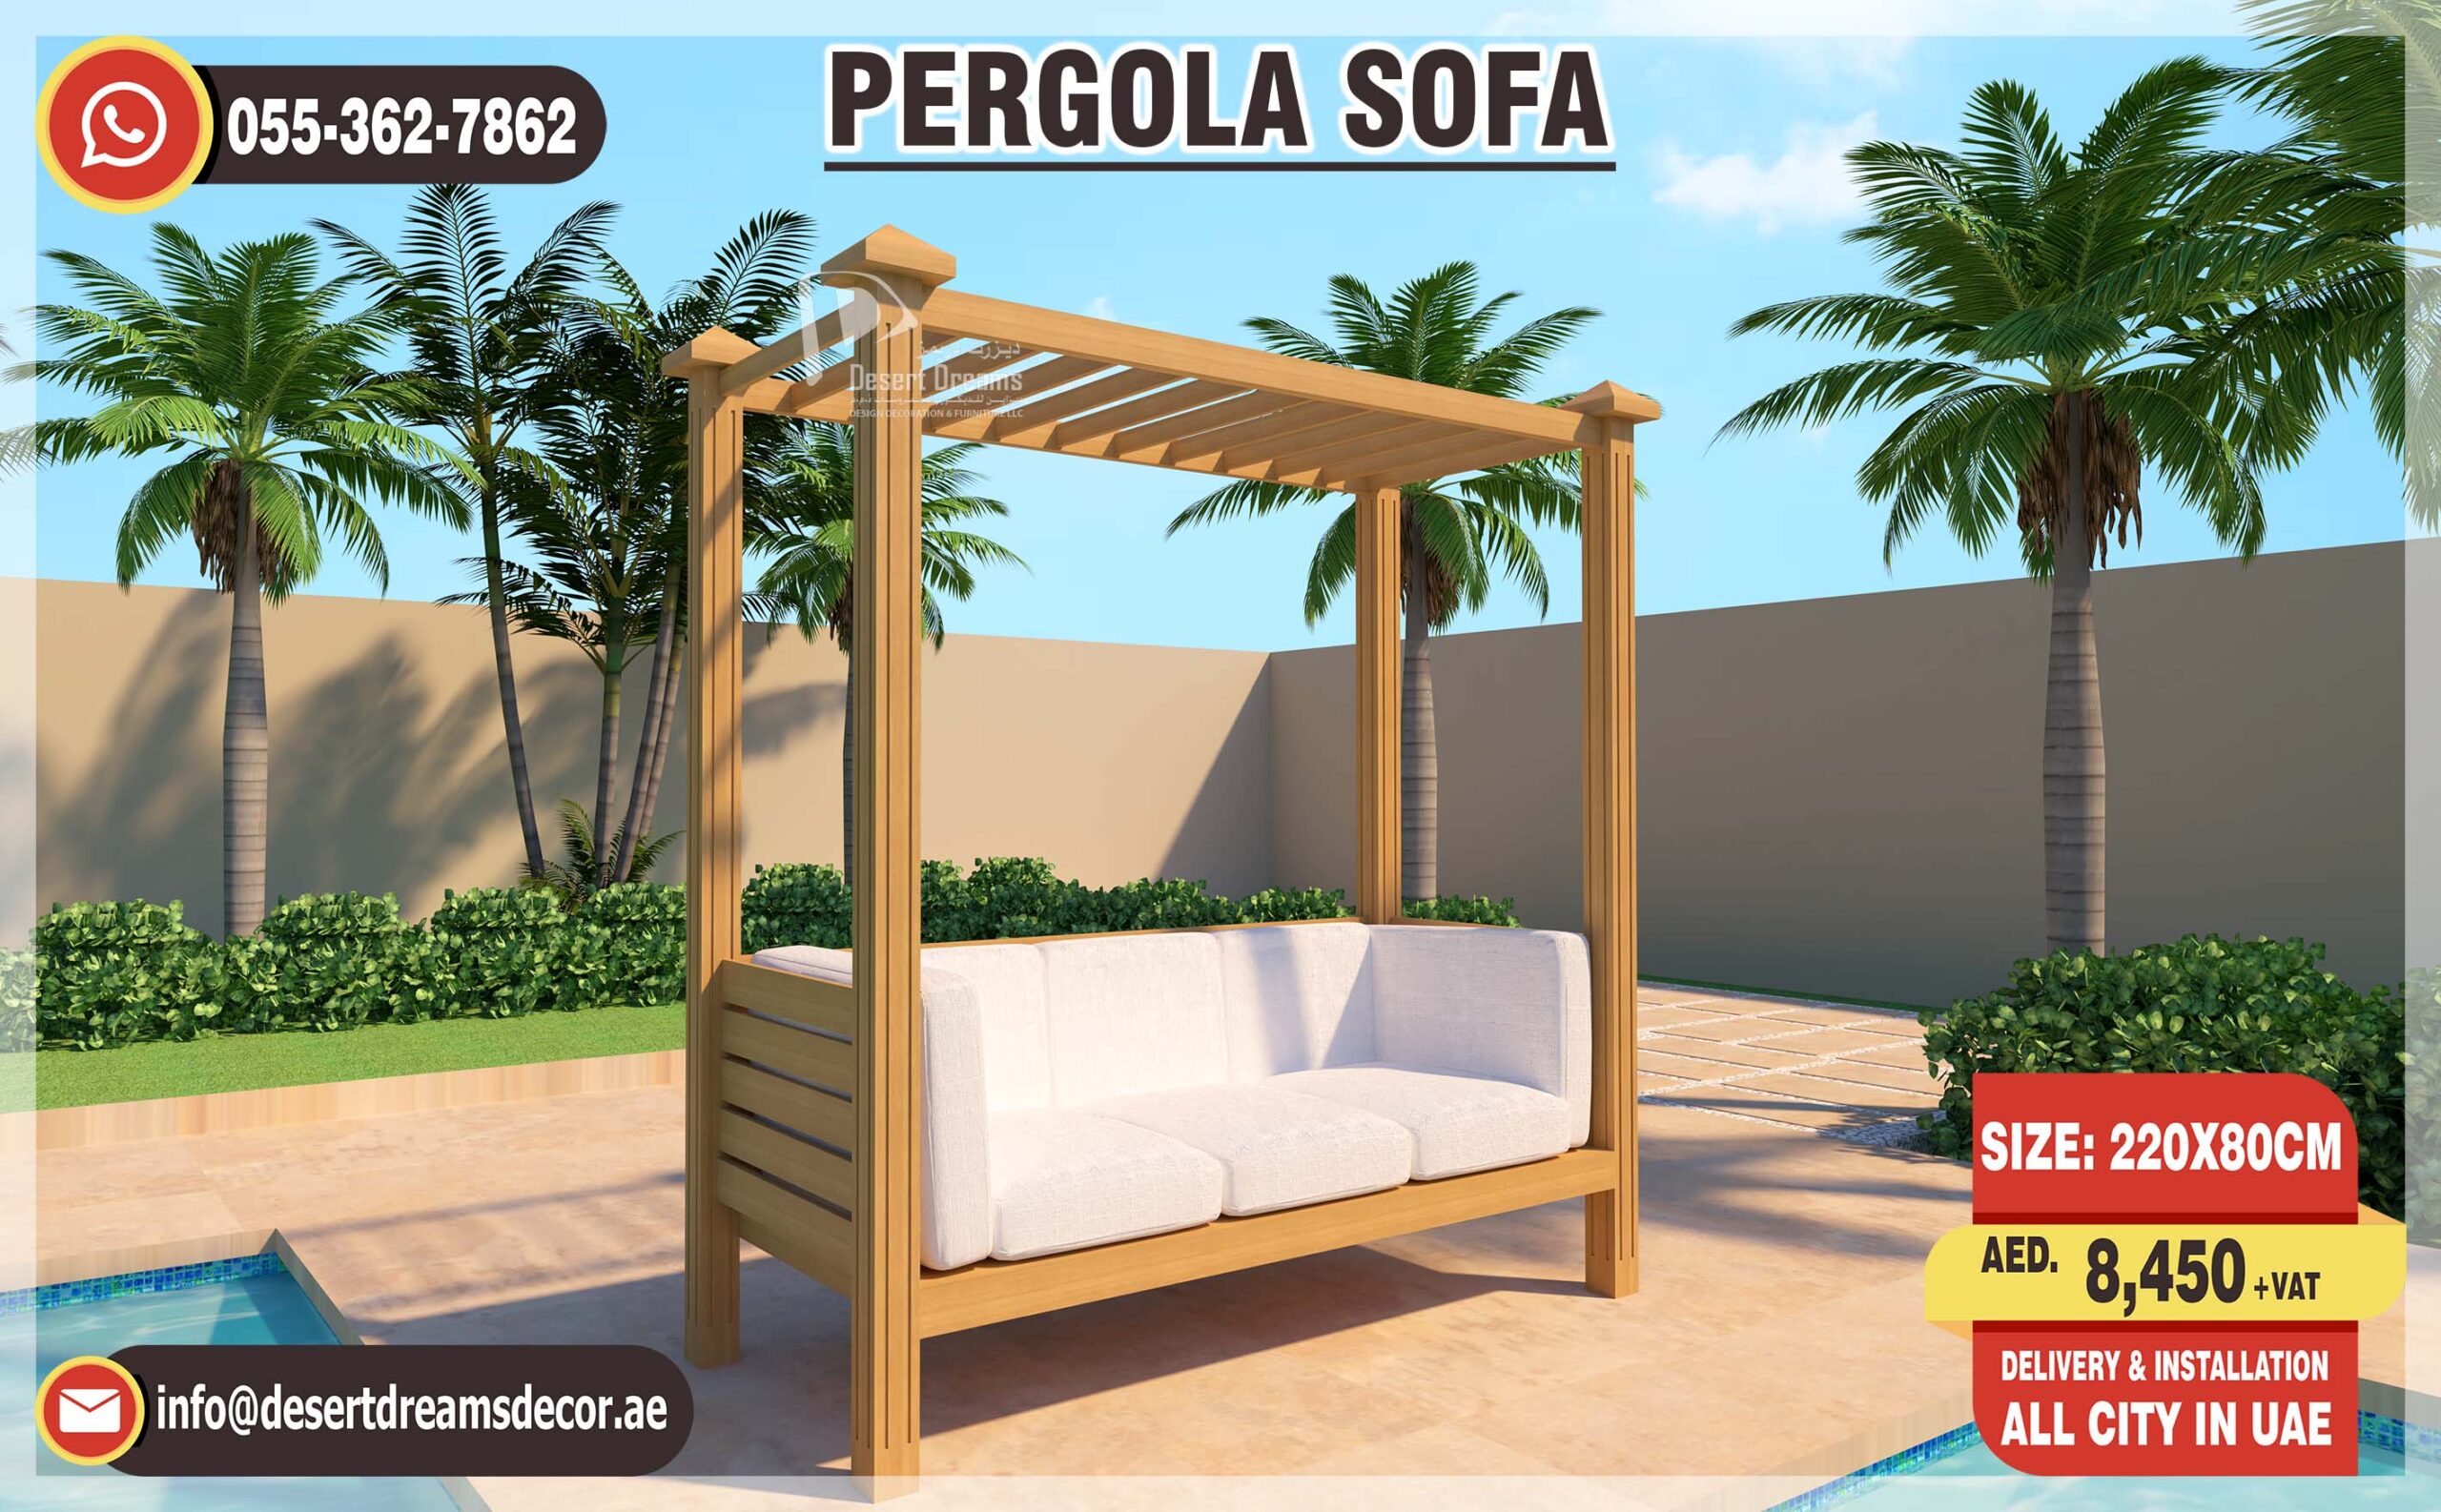 Our Wooden Pergolas Provides Protection From The Sun Heat in Uae.